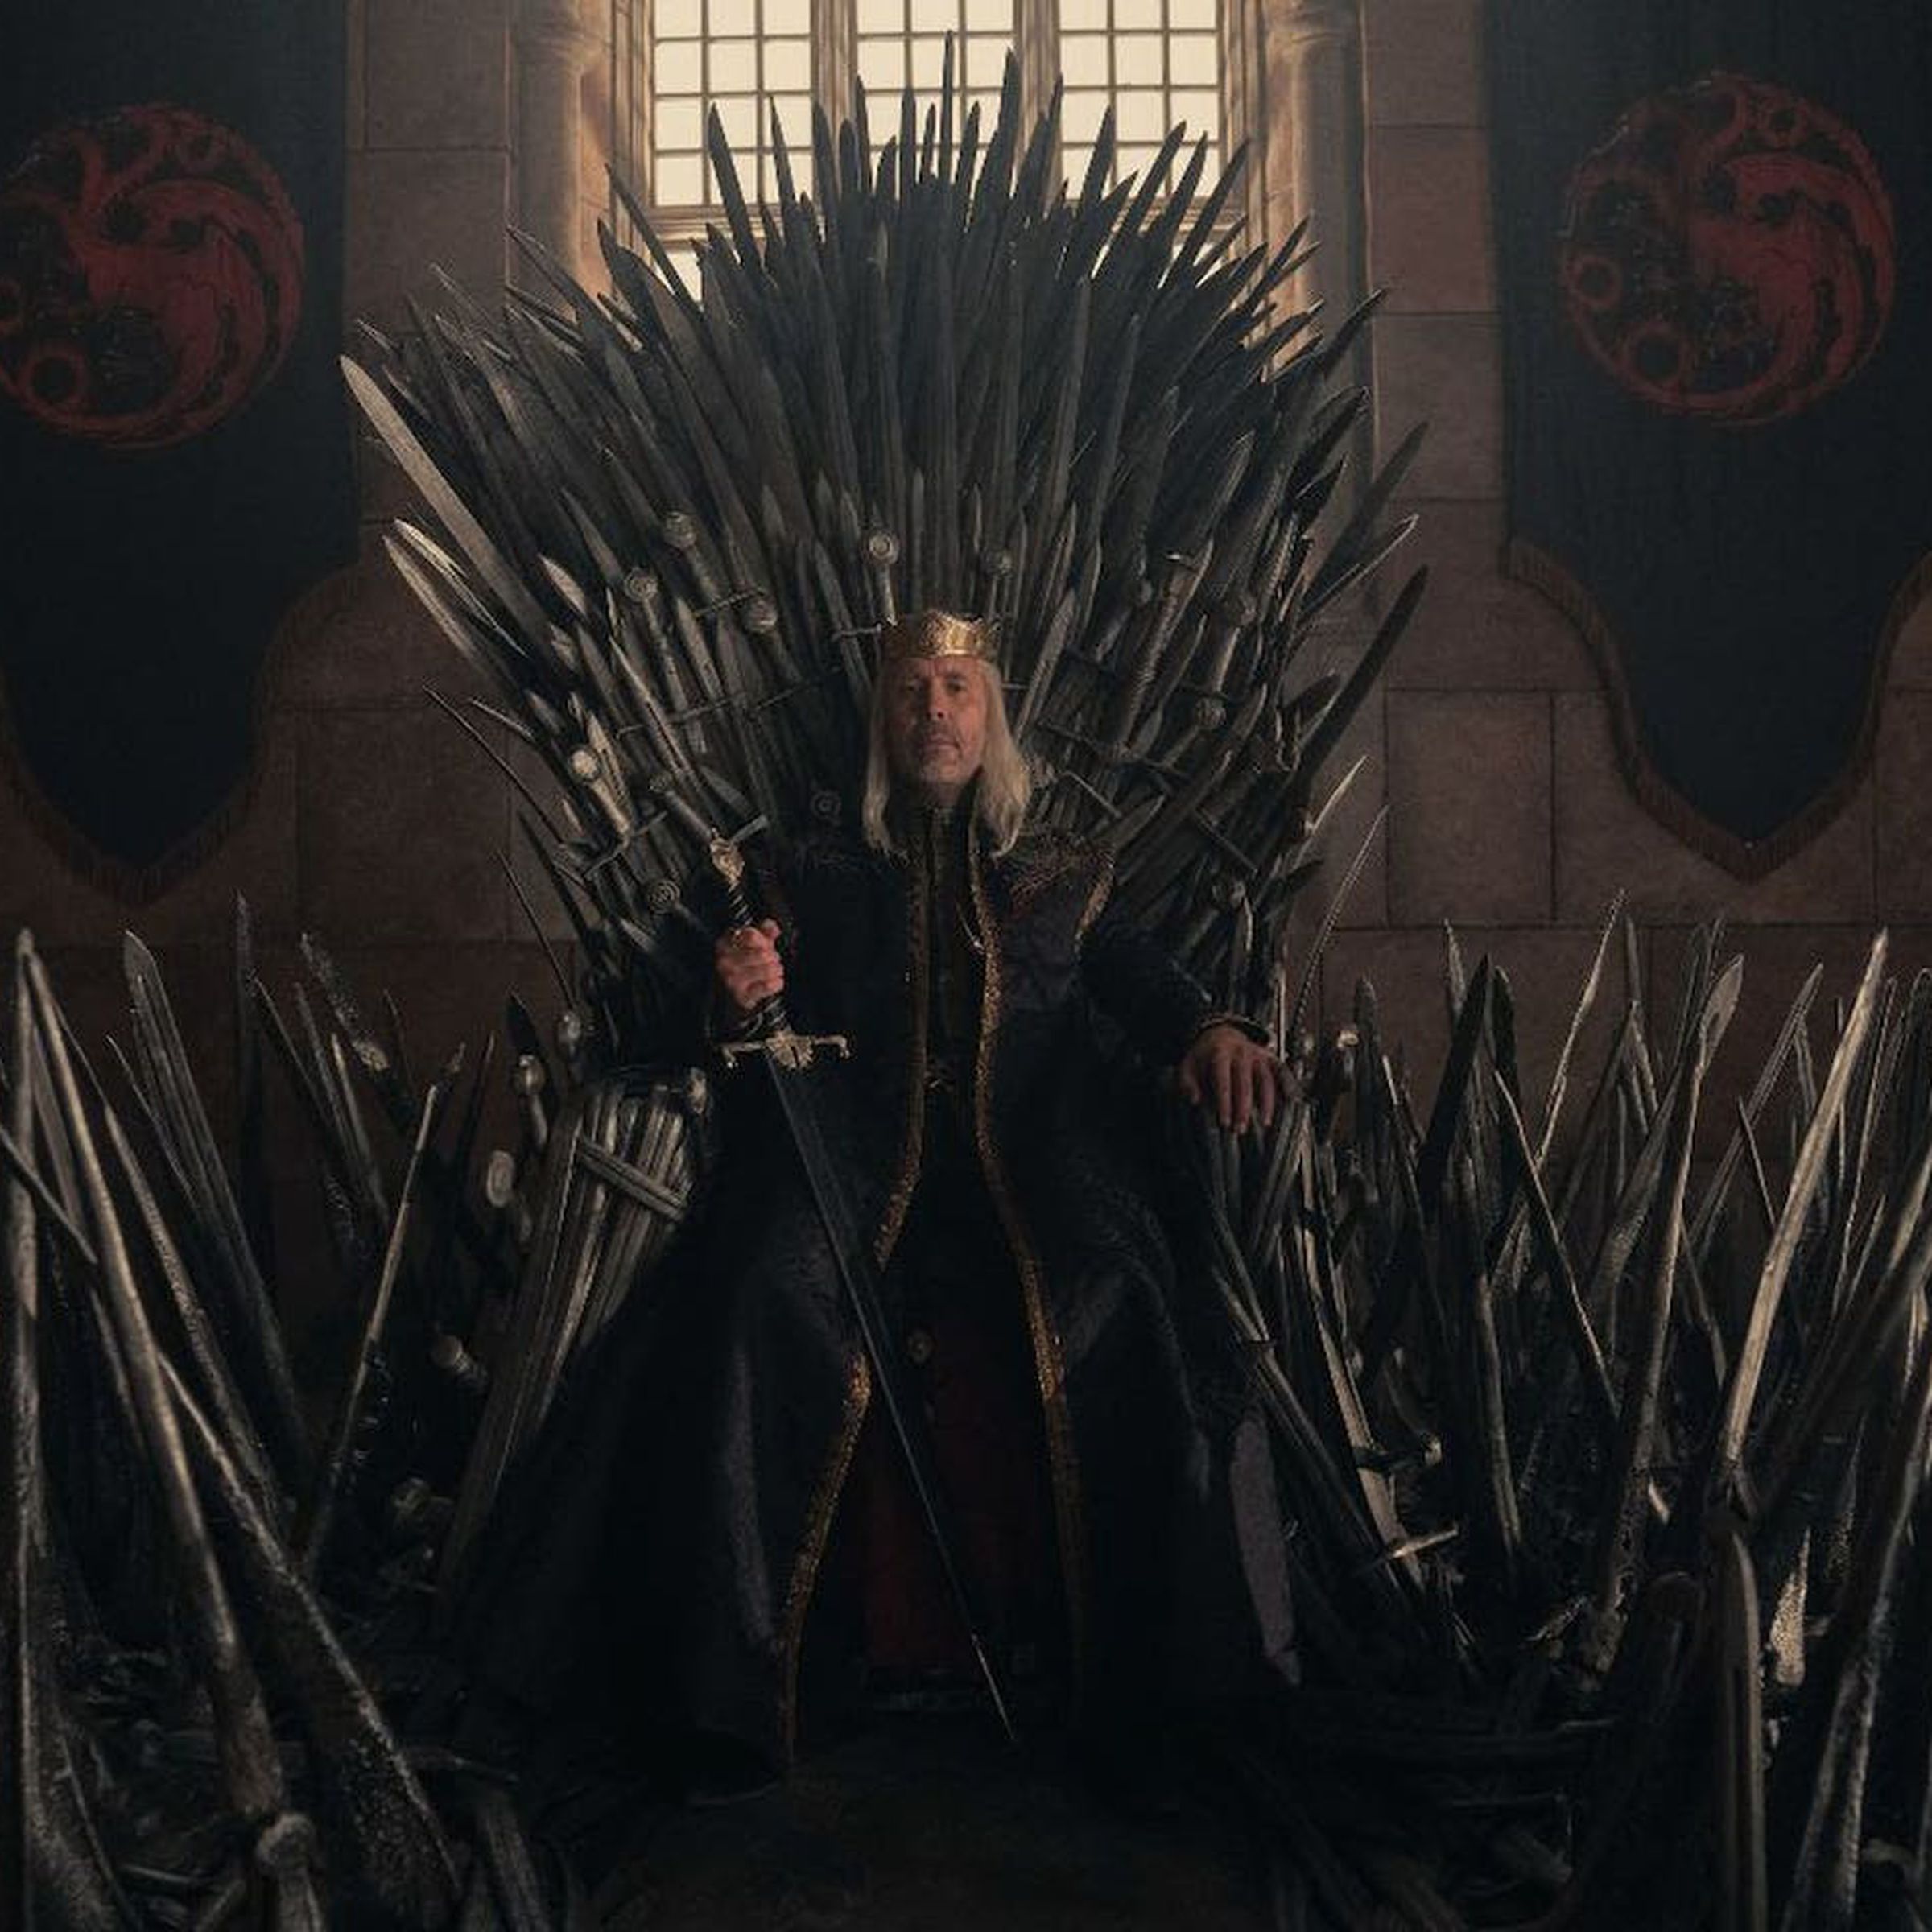 A character from the House of the Dragon sits on the Iron Throne.